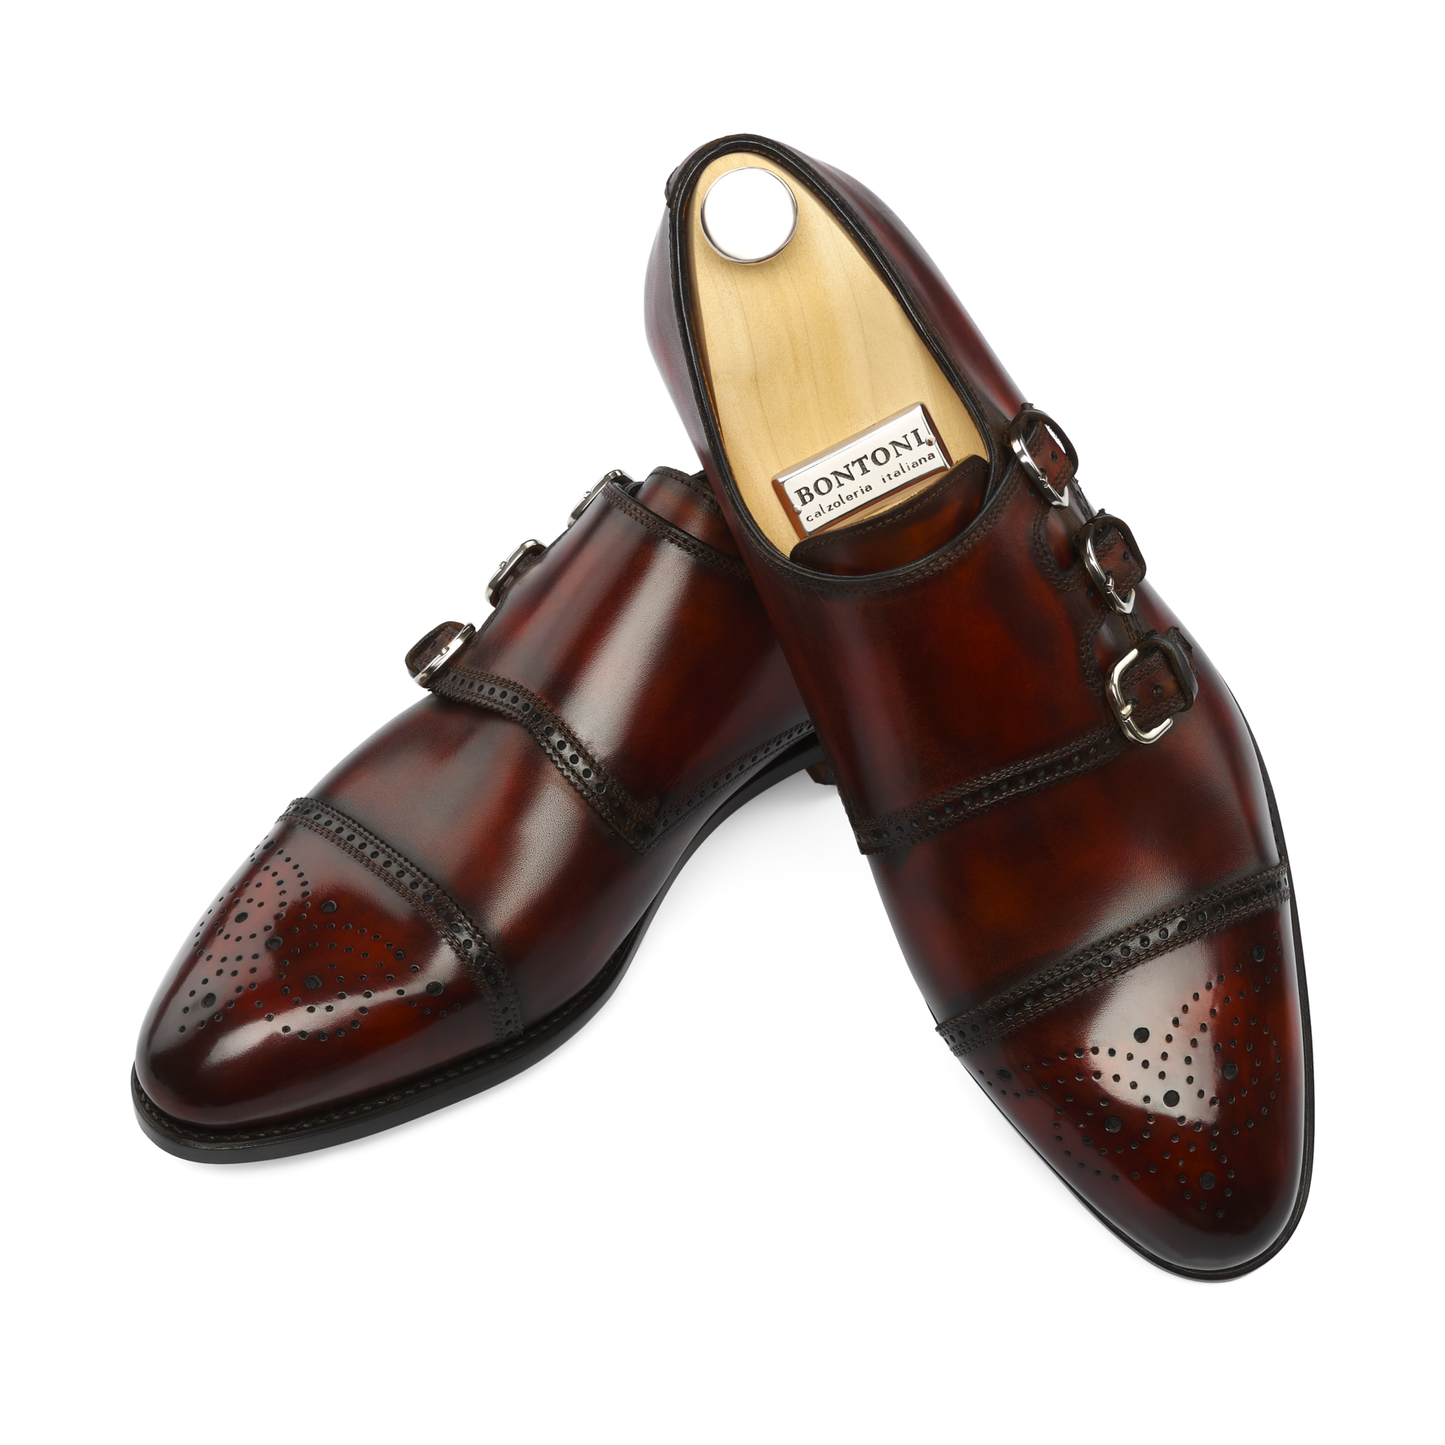 Bontoni "Excelsior" Triple-Buckle Monk with Perforated Details and Medallion - SARTALE